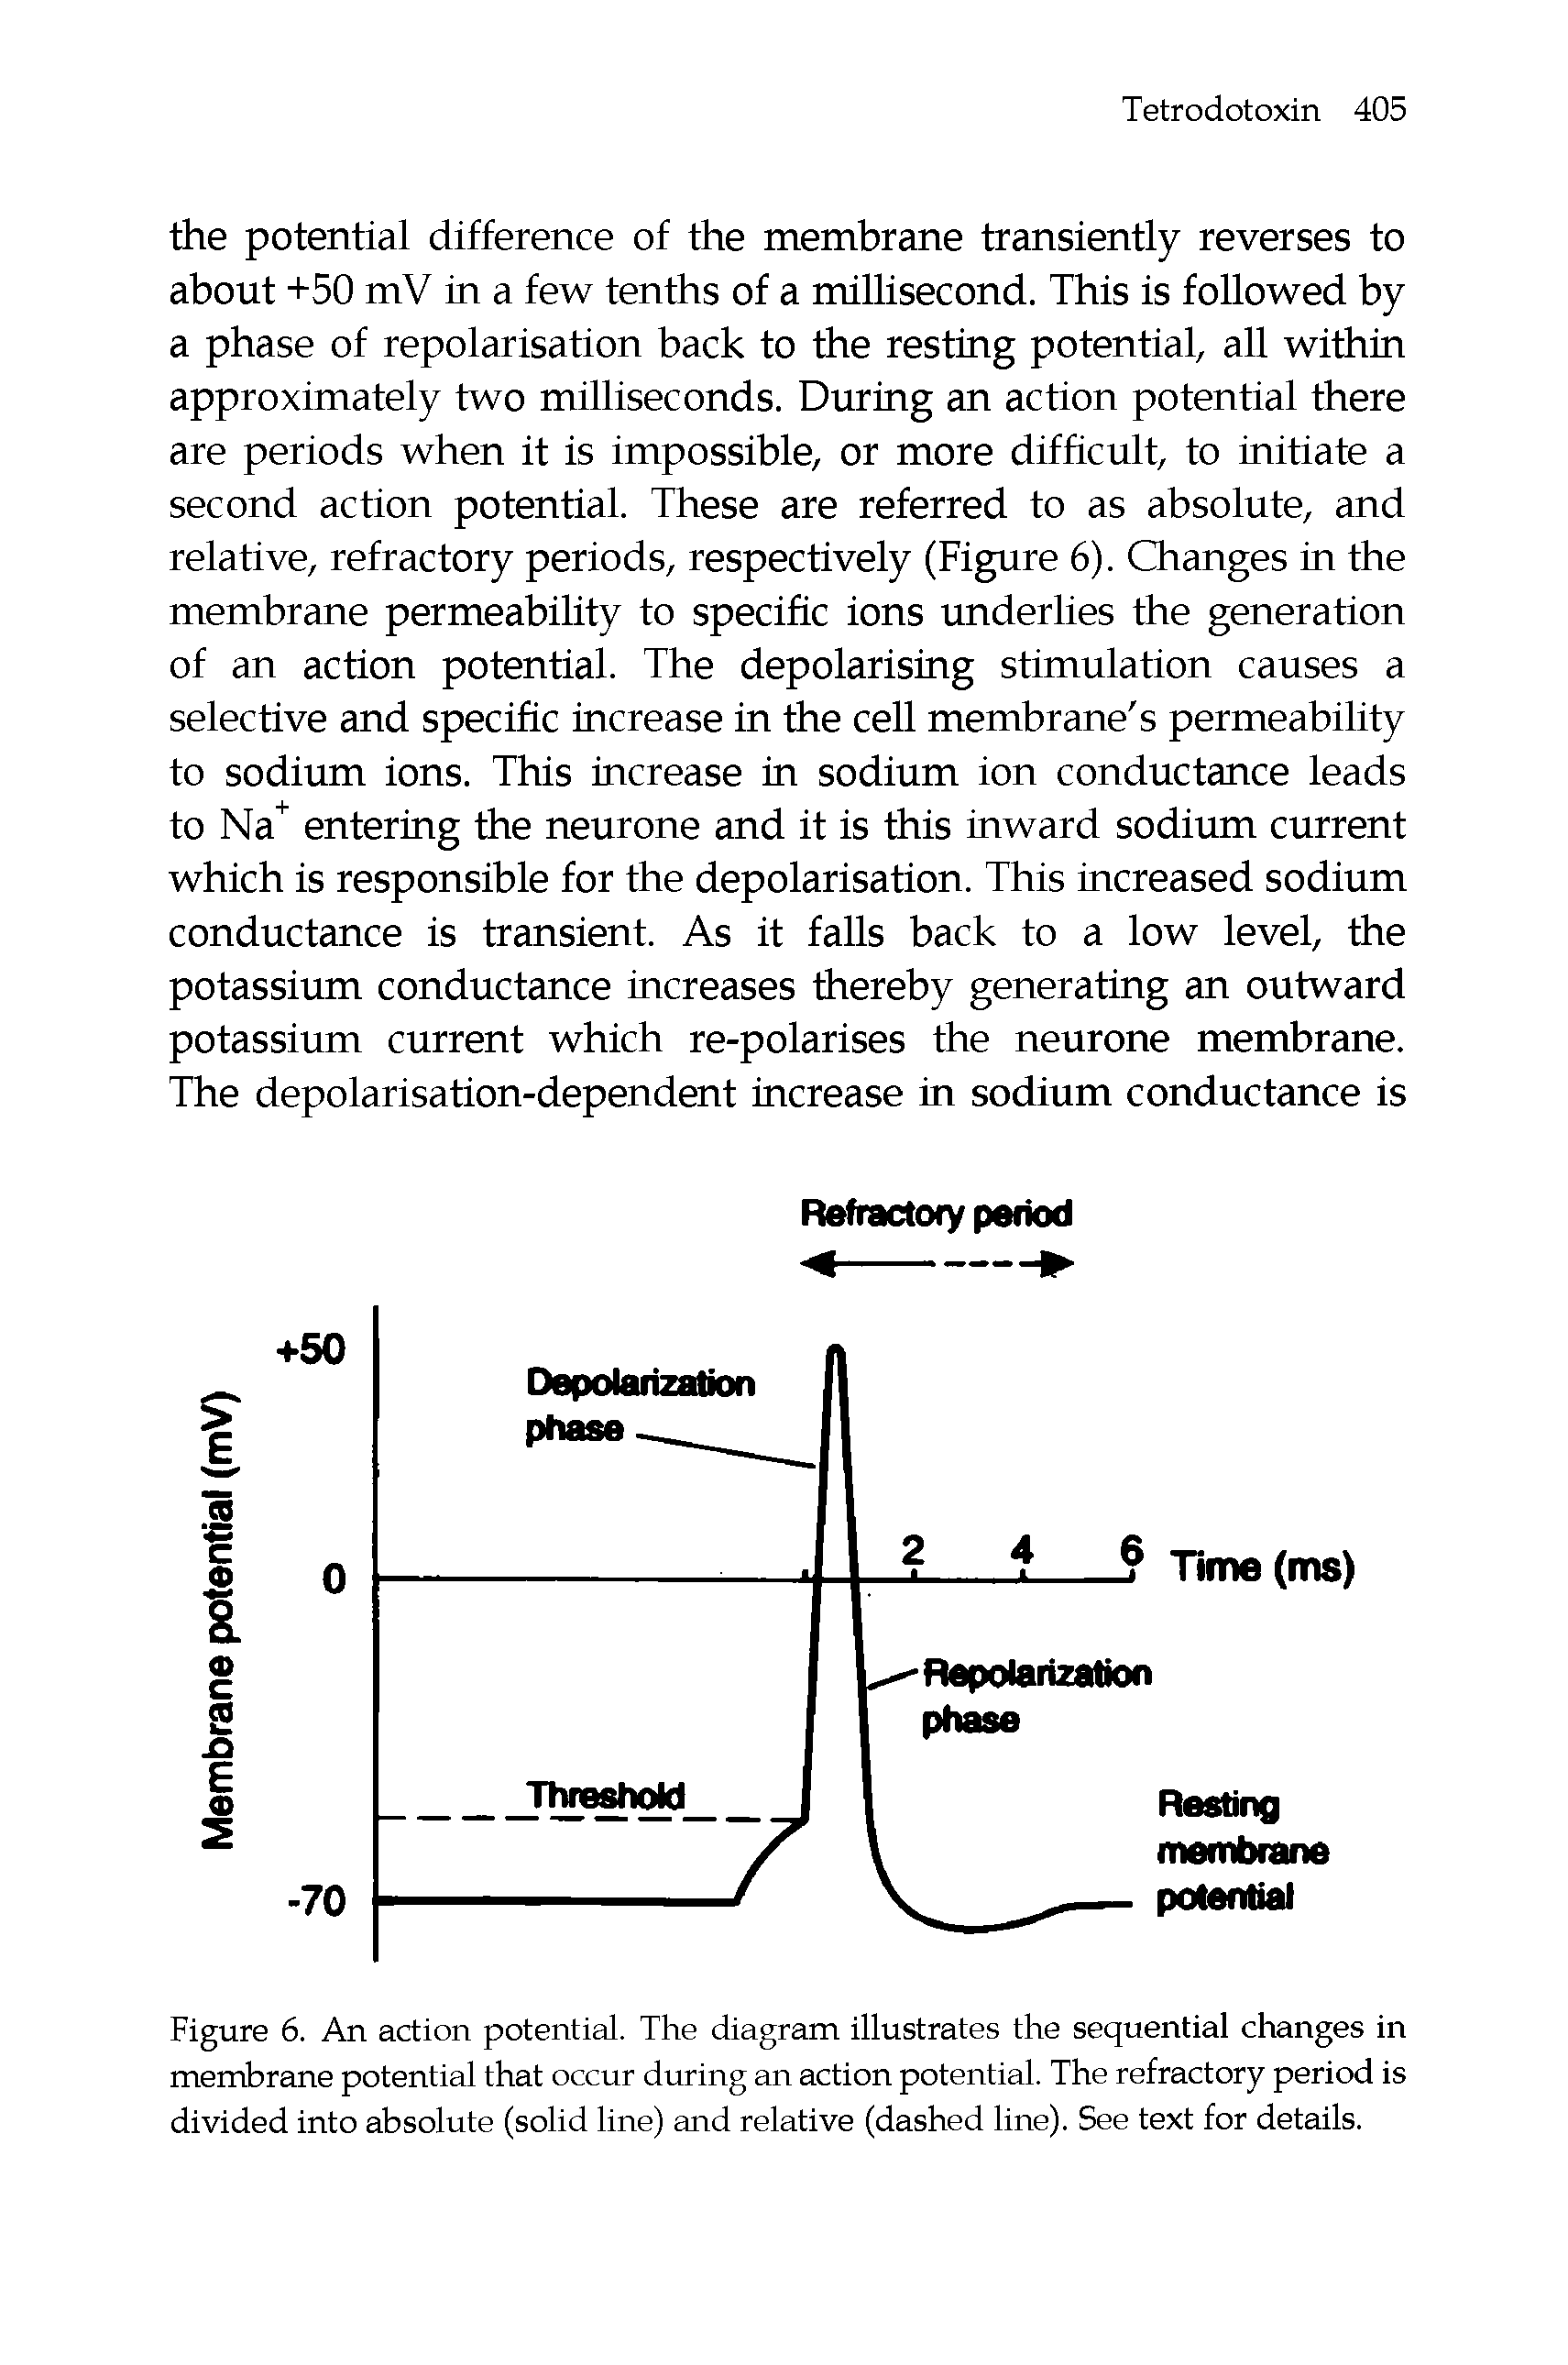 Figure 6. An action potential. The diagram illustrates the sequential changes in membrane potential that occur during an action potential. The refractory period is divided into absolute (solid line) and relative (dashed line). See text for details.